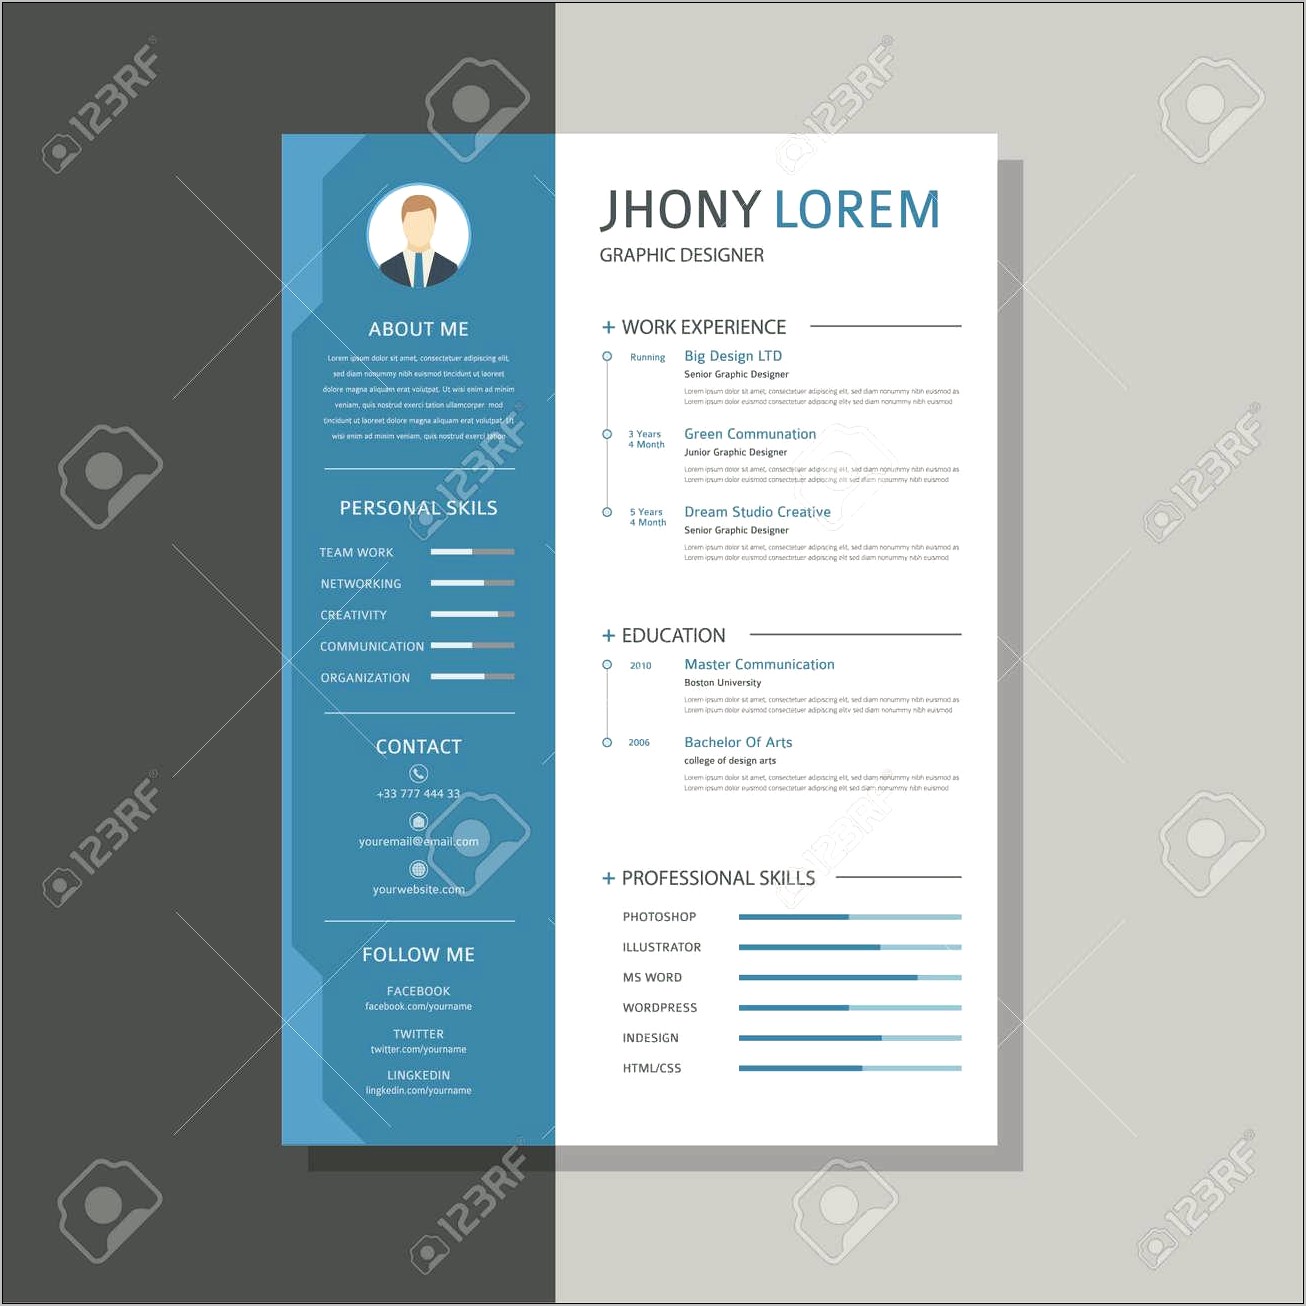 Easy To Use Resume Templates With Pictures